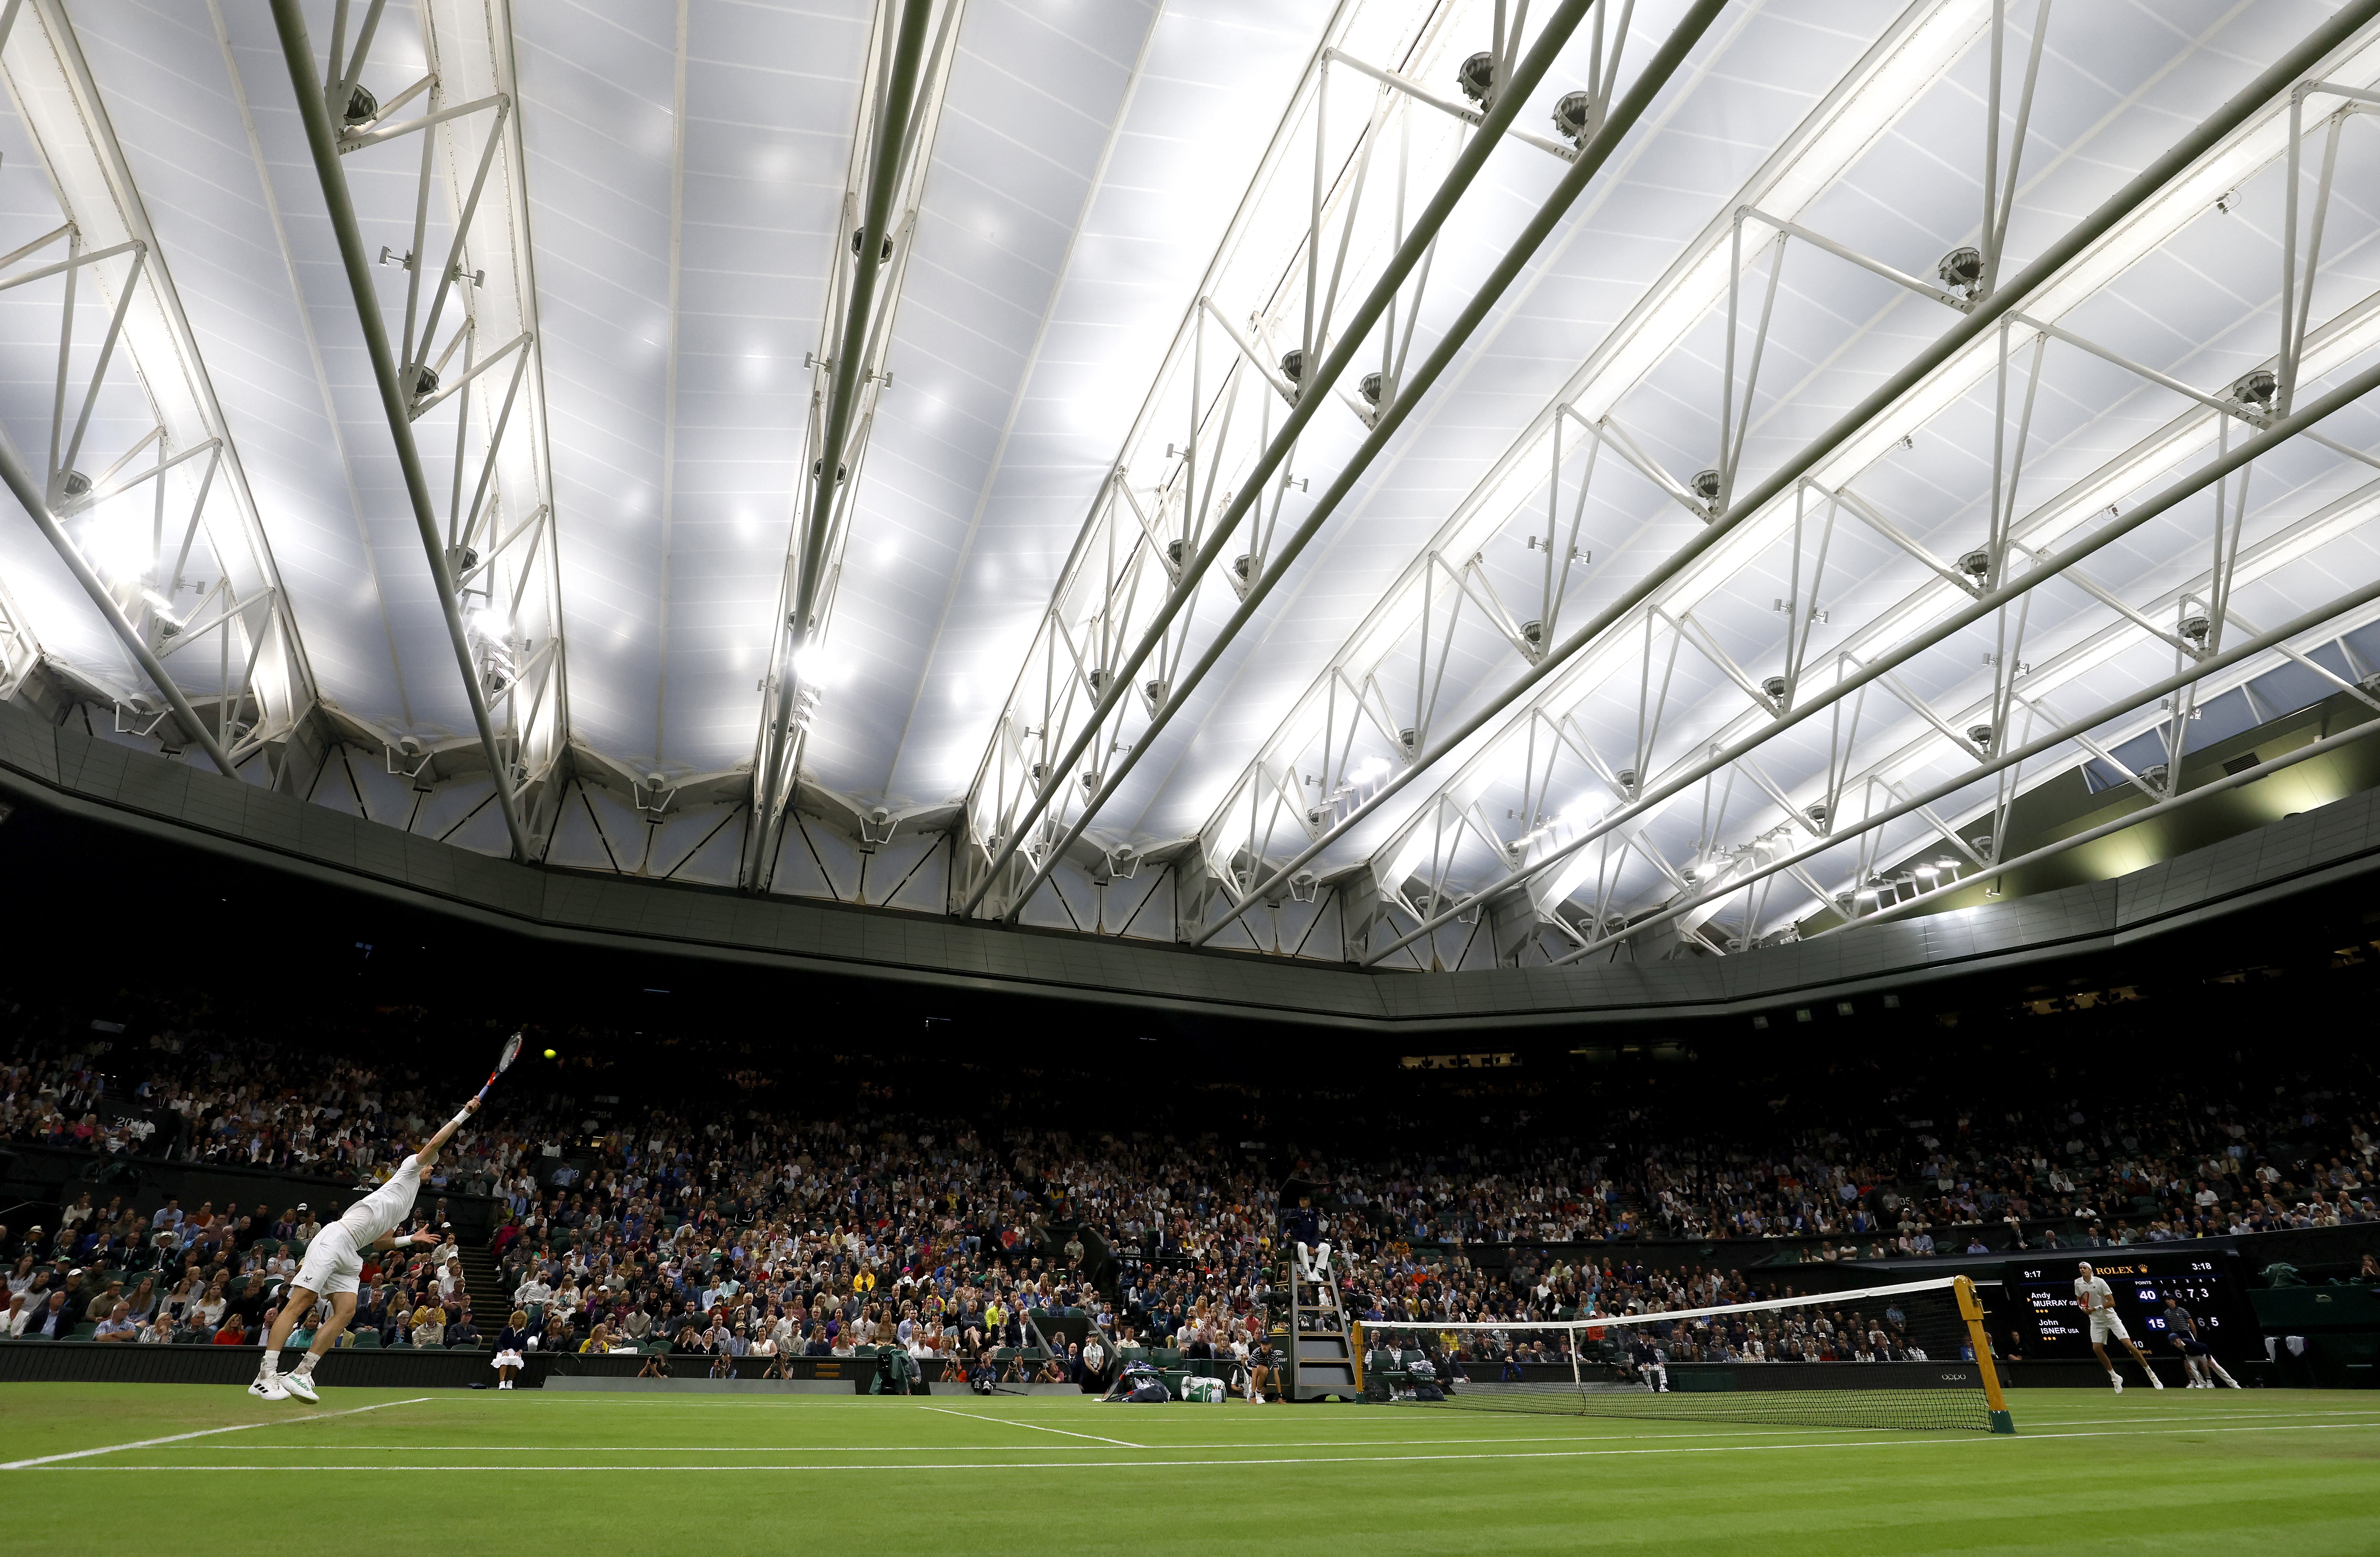 pa ready, ian ritchie, amélie mauresmo, all england lawn tennis club, on this day in 2009 – new wimbledon roof closed during match for first time